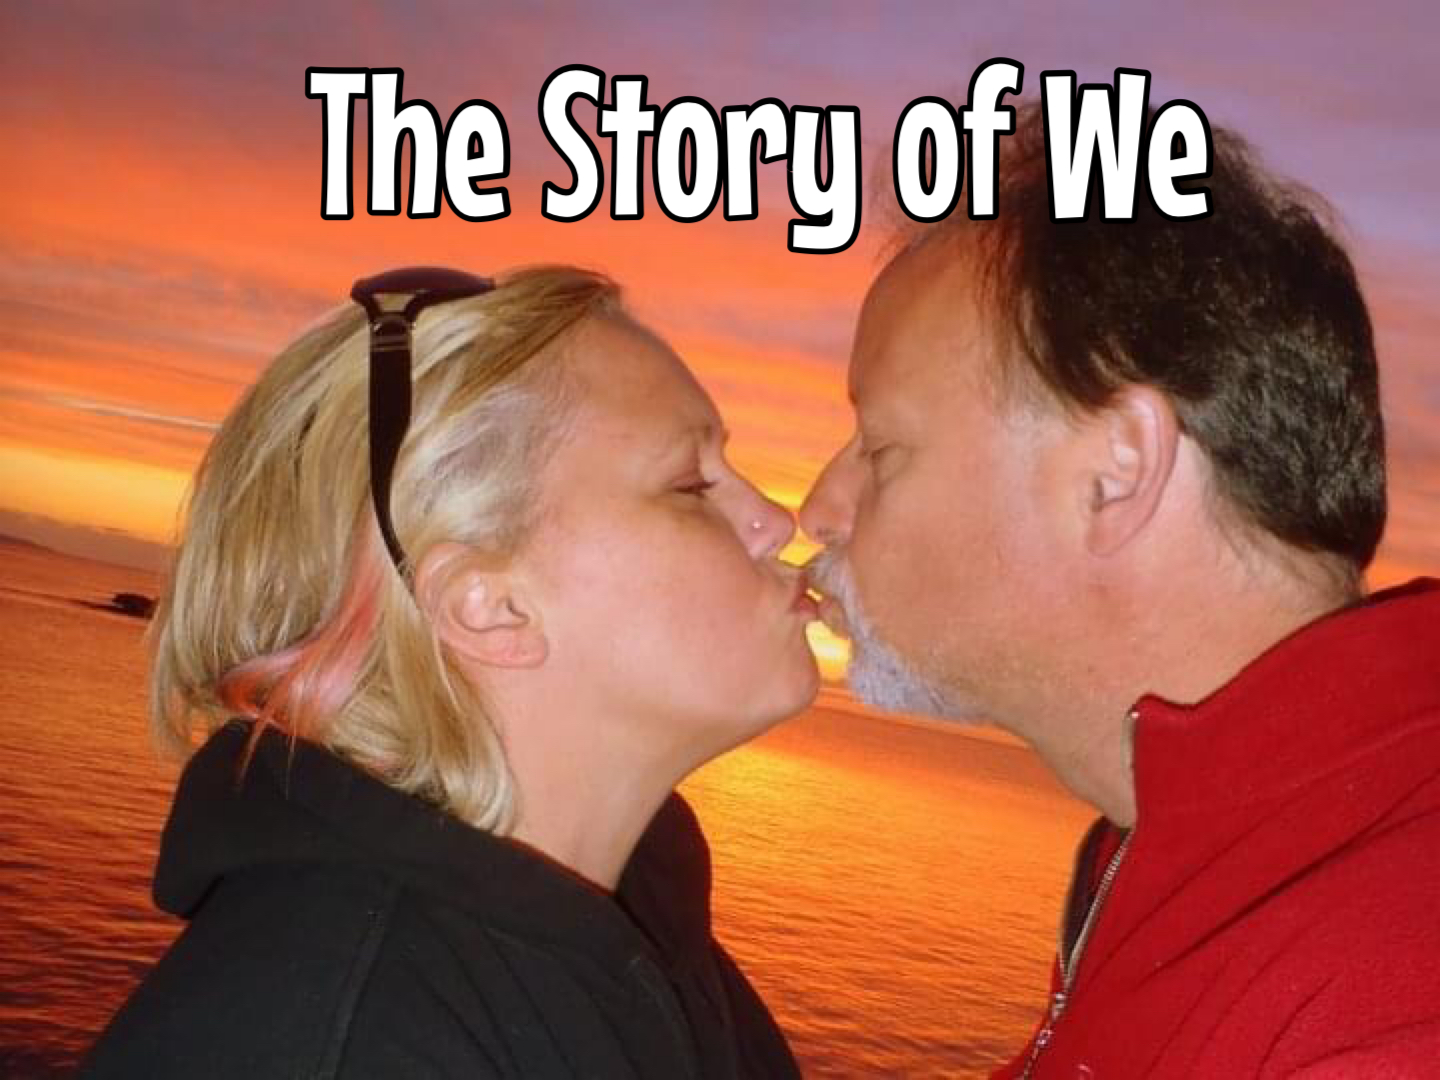 The Story of We